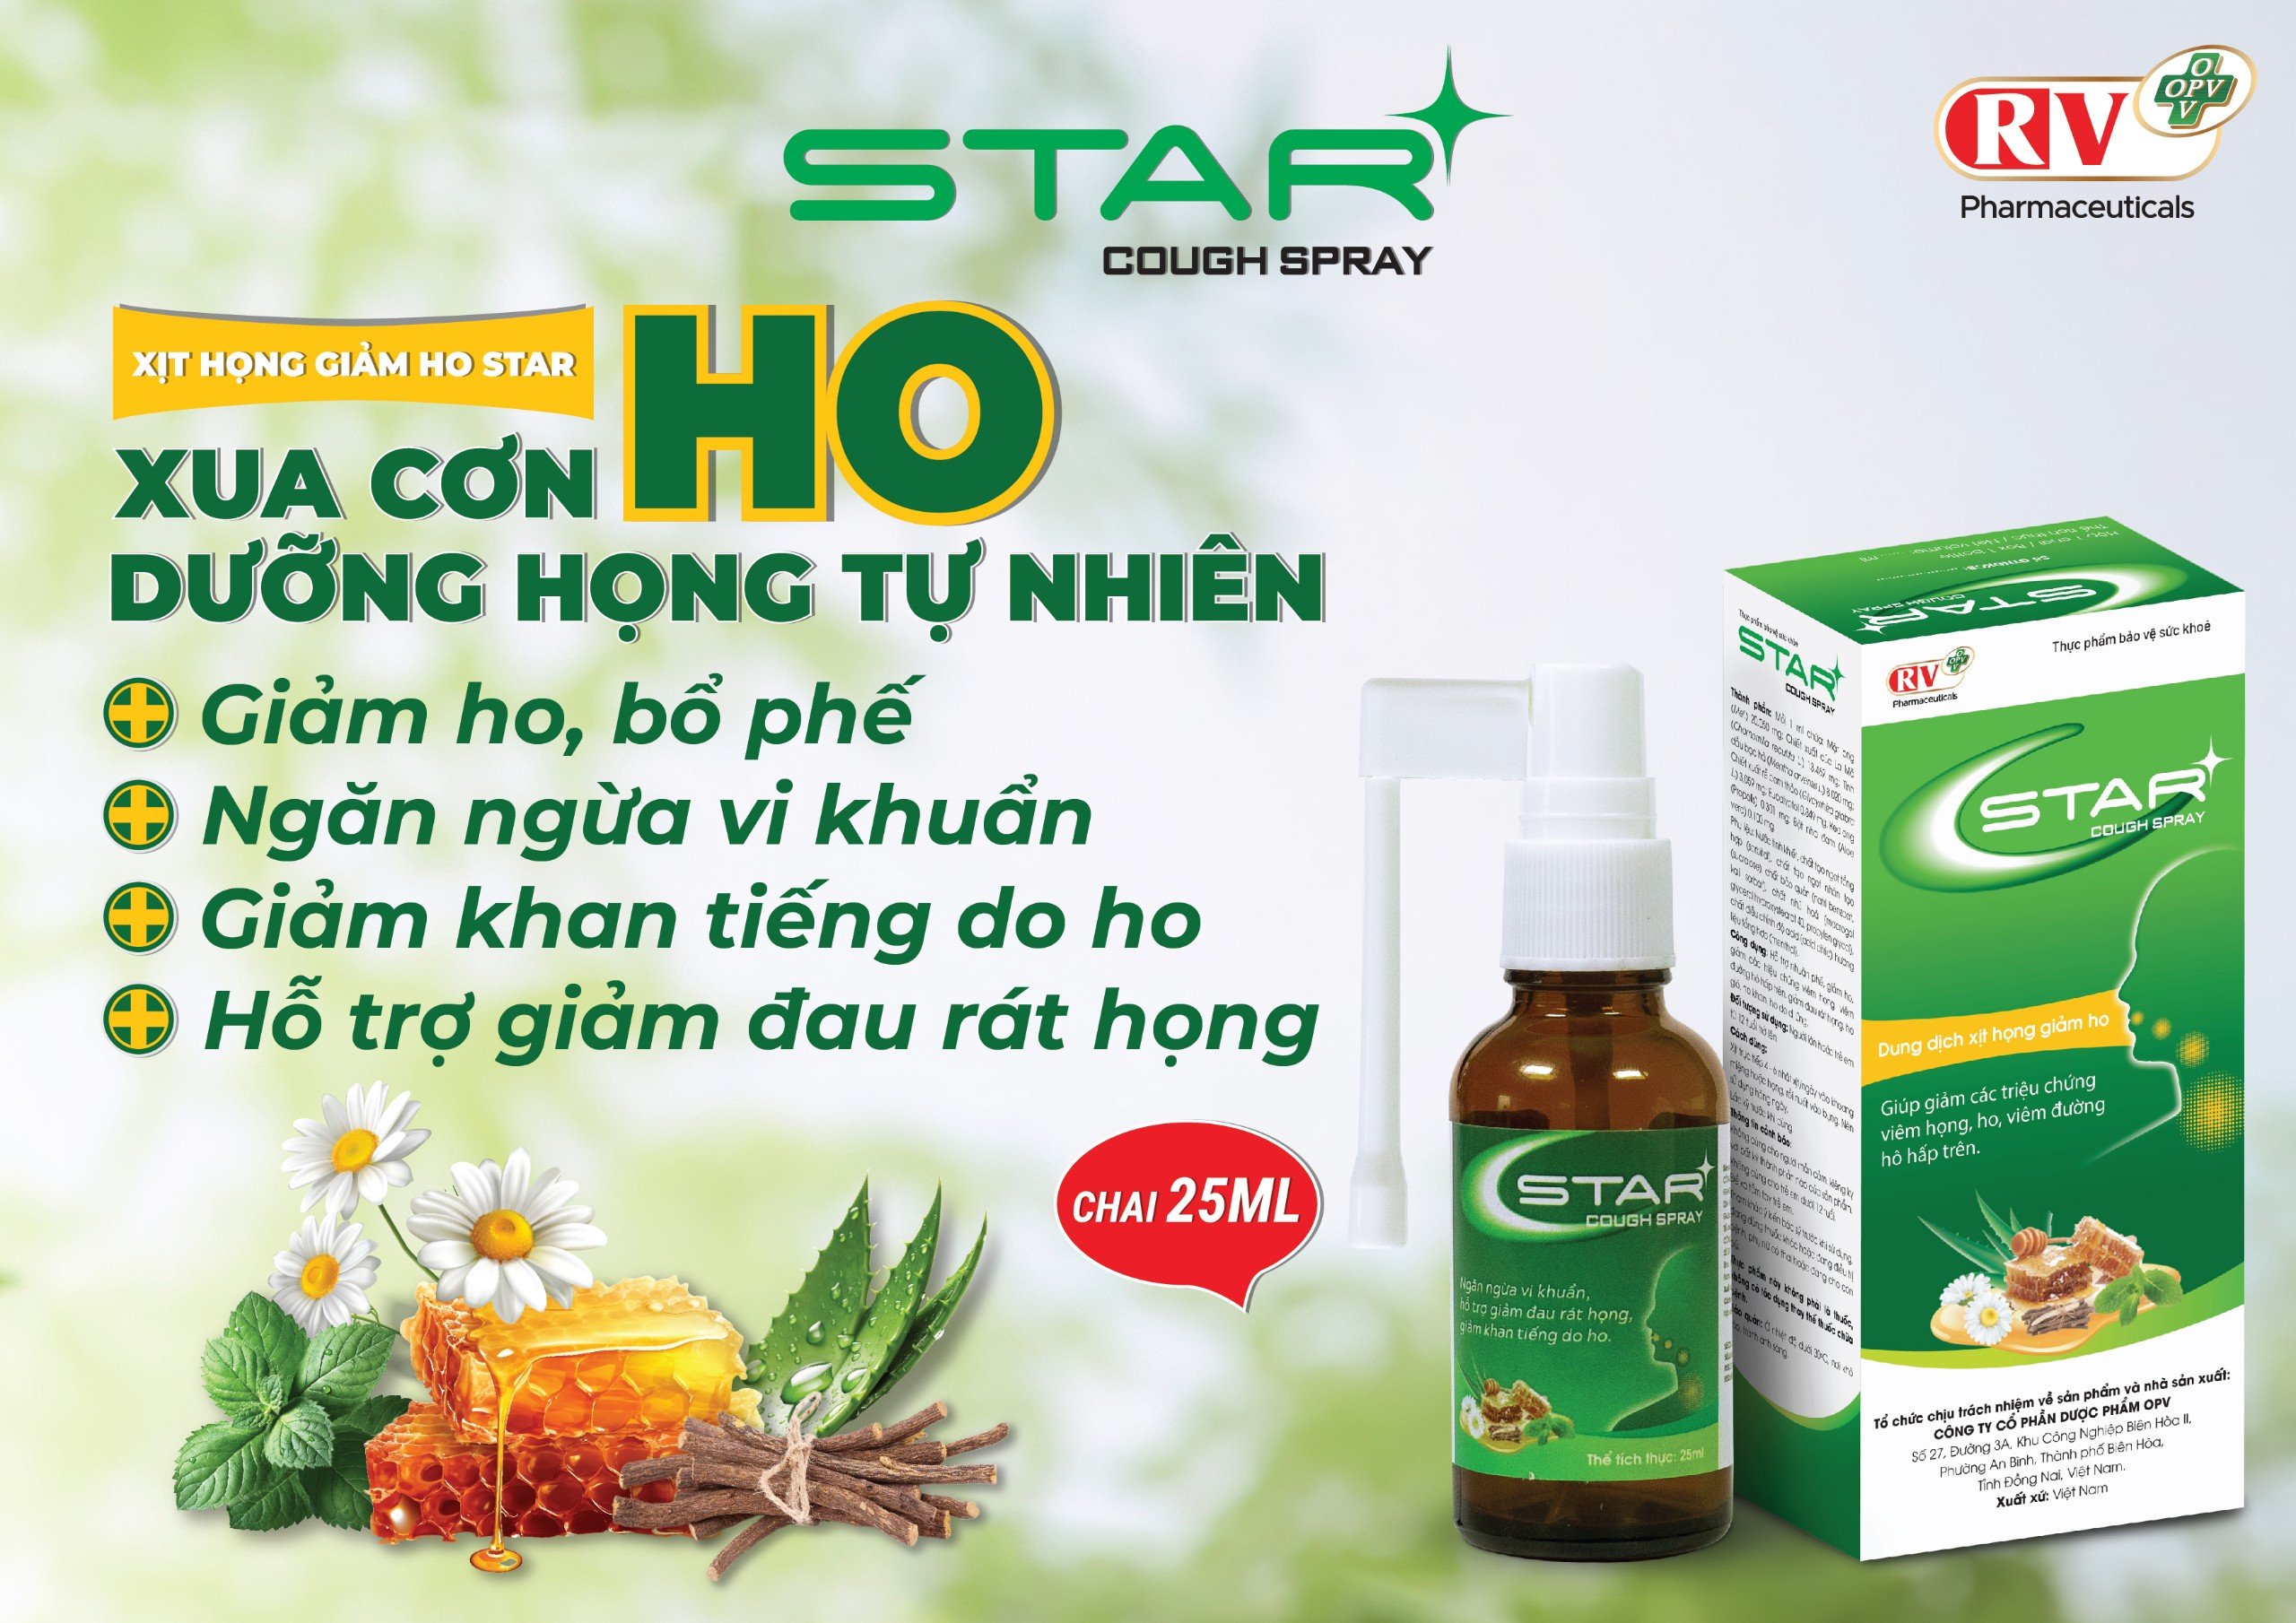 TASTE MENTHOL THIS SEASON WITH STAR COUGH SRPAY